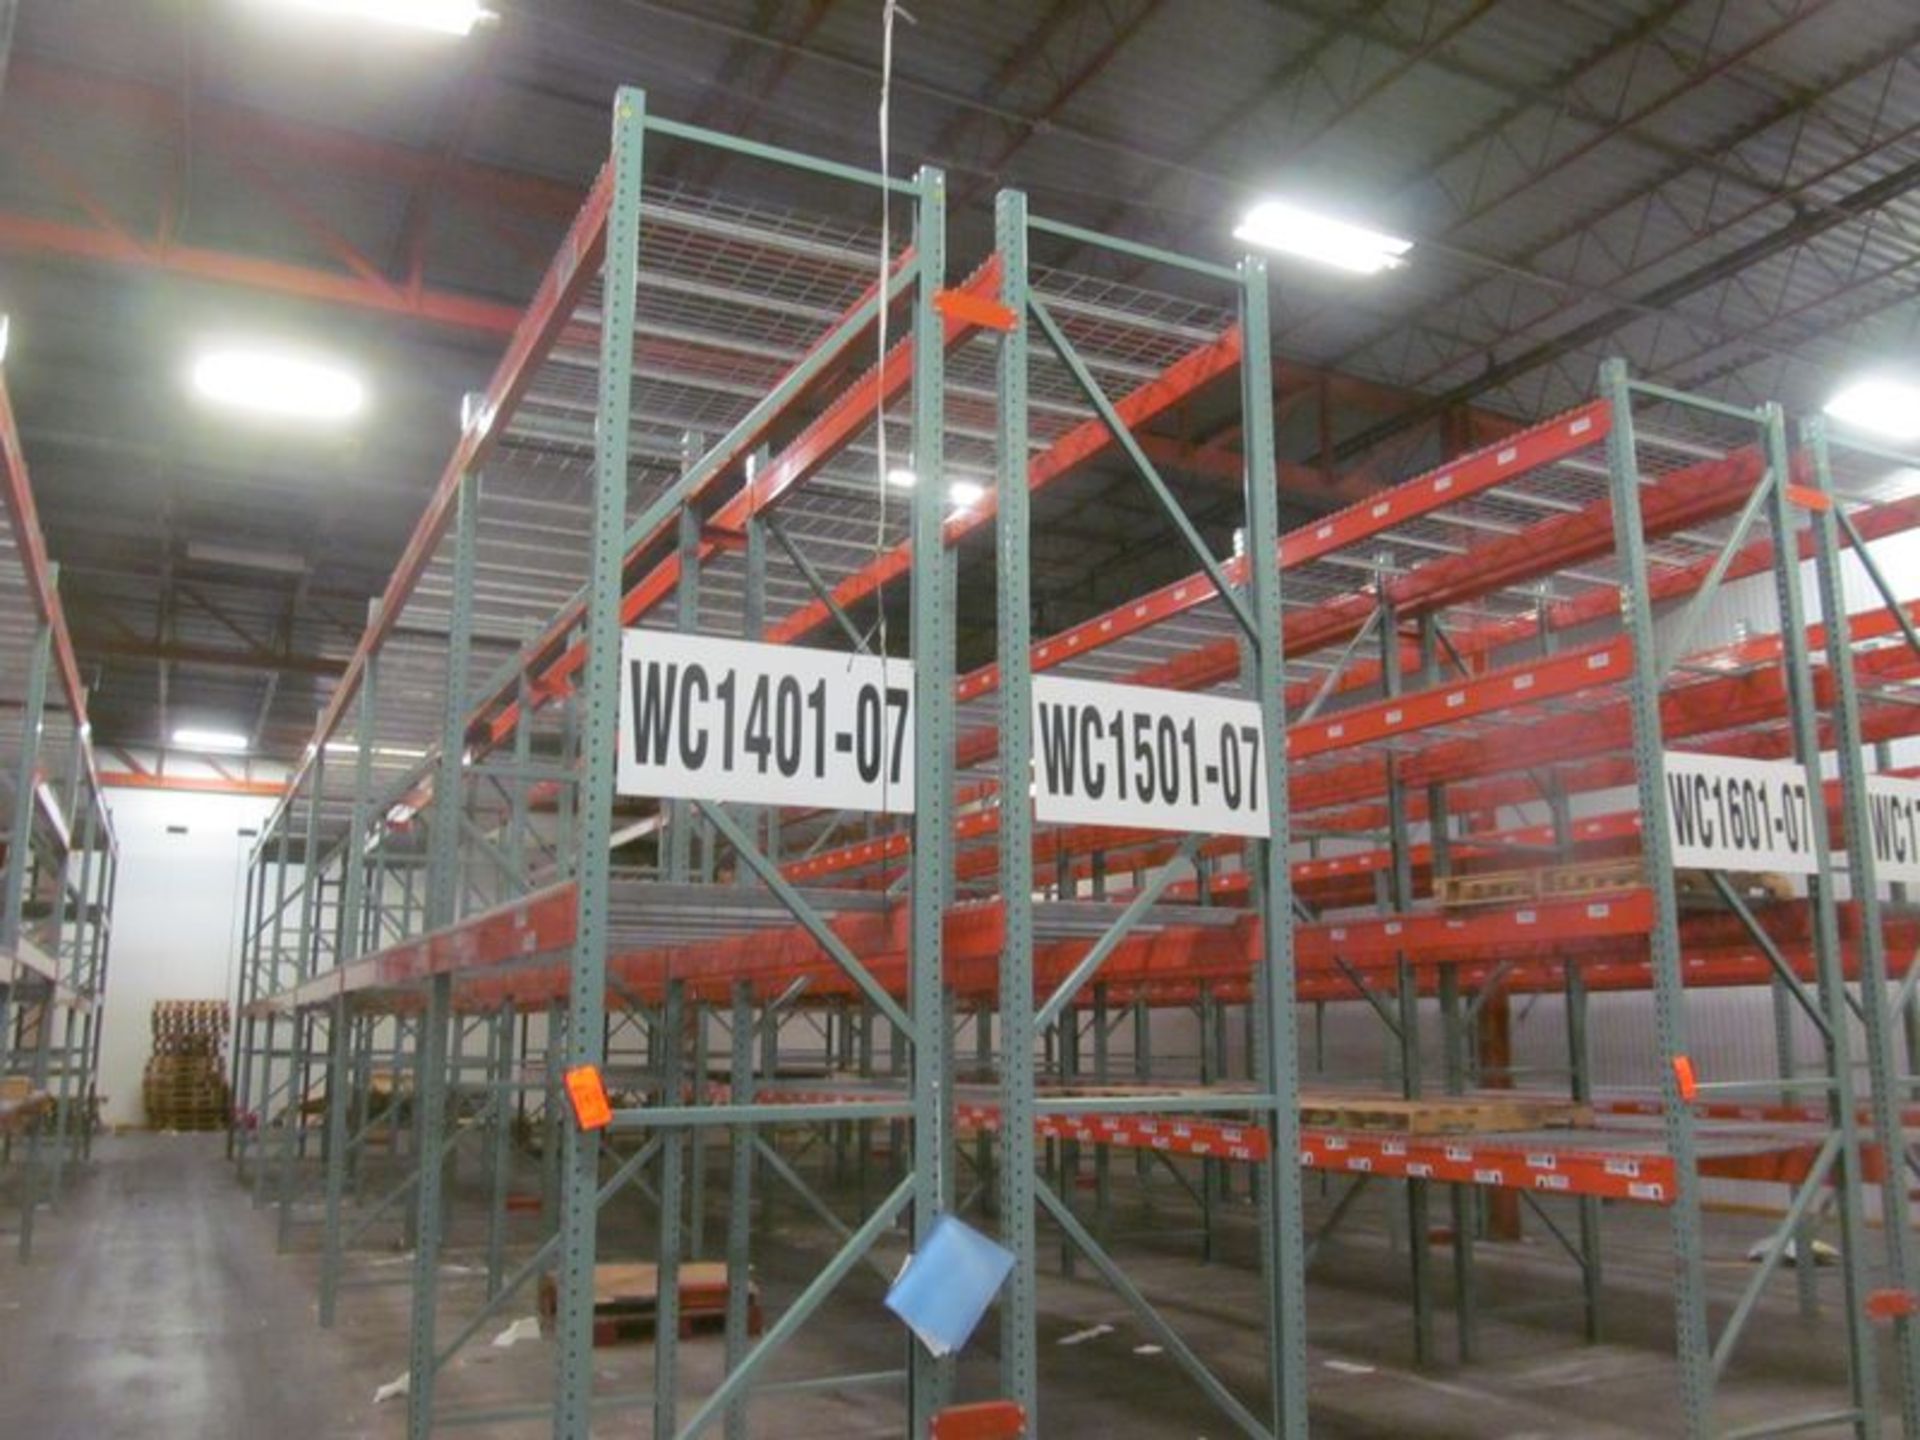 Lot of (12) sections Interack cup style pallet rack, (14) 14' high, 3" x 3" uprights, (40) 12'